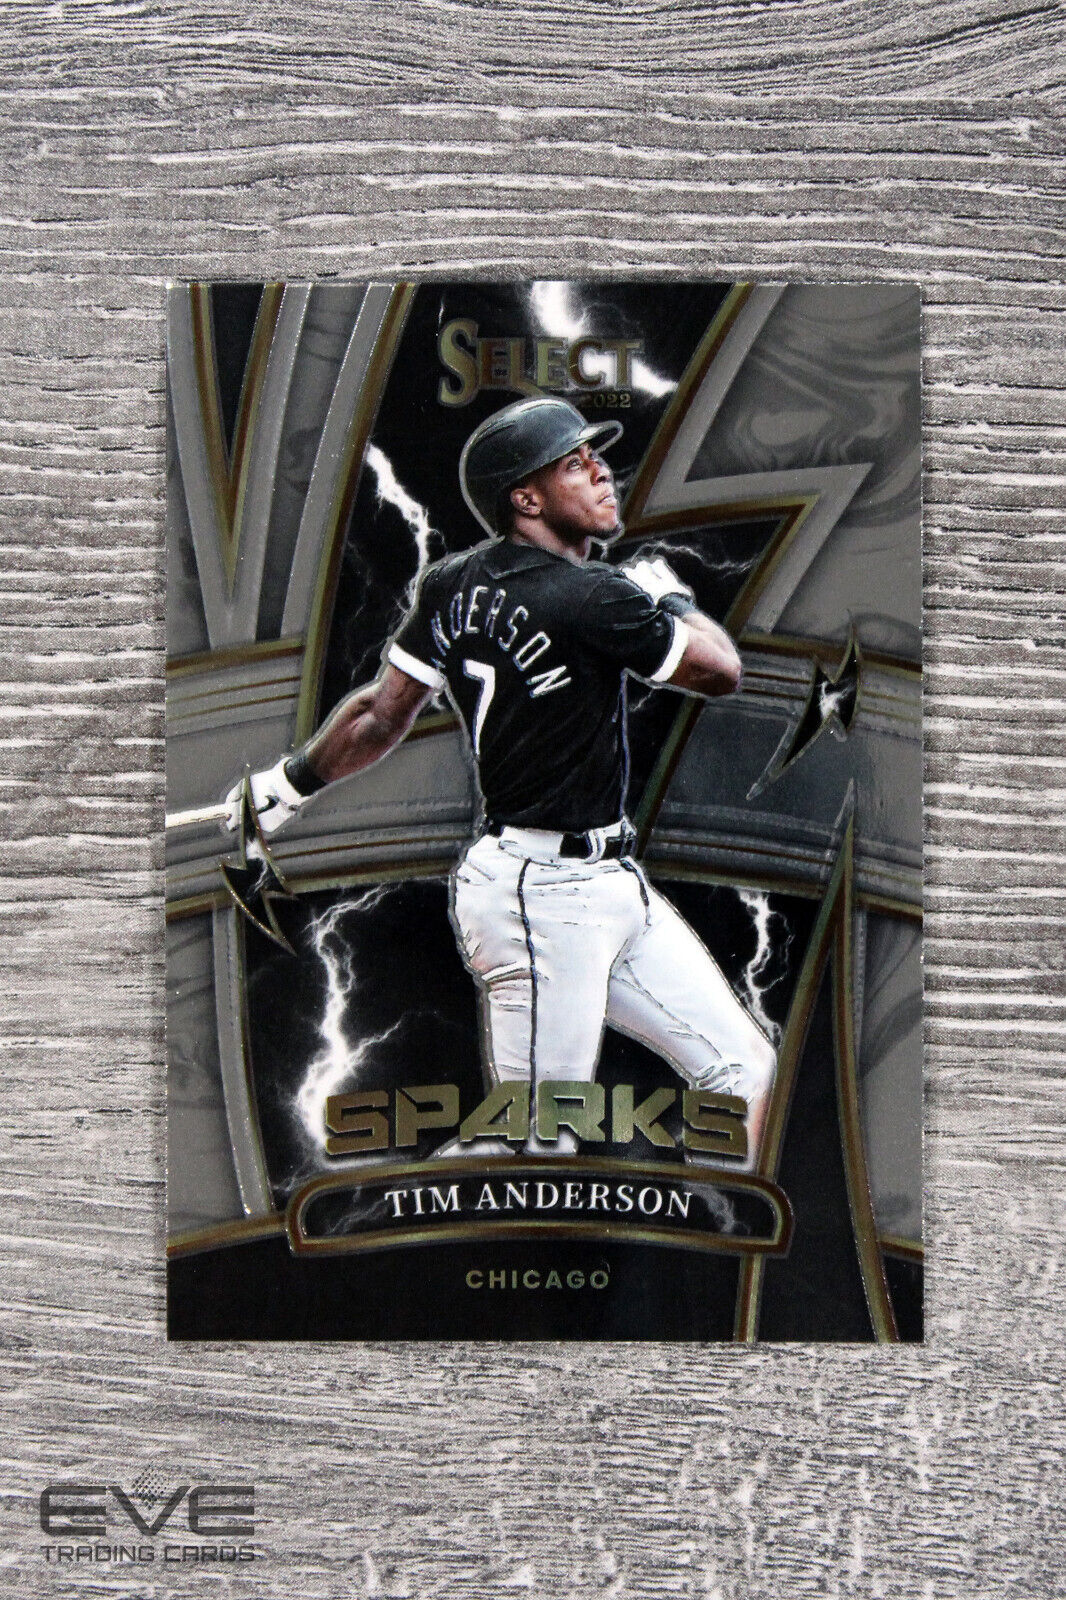 2022 Panini Select Baseball Card #SP10 Tim Anderson Sparks Insert - NM/M